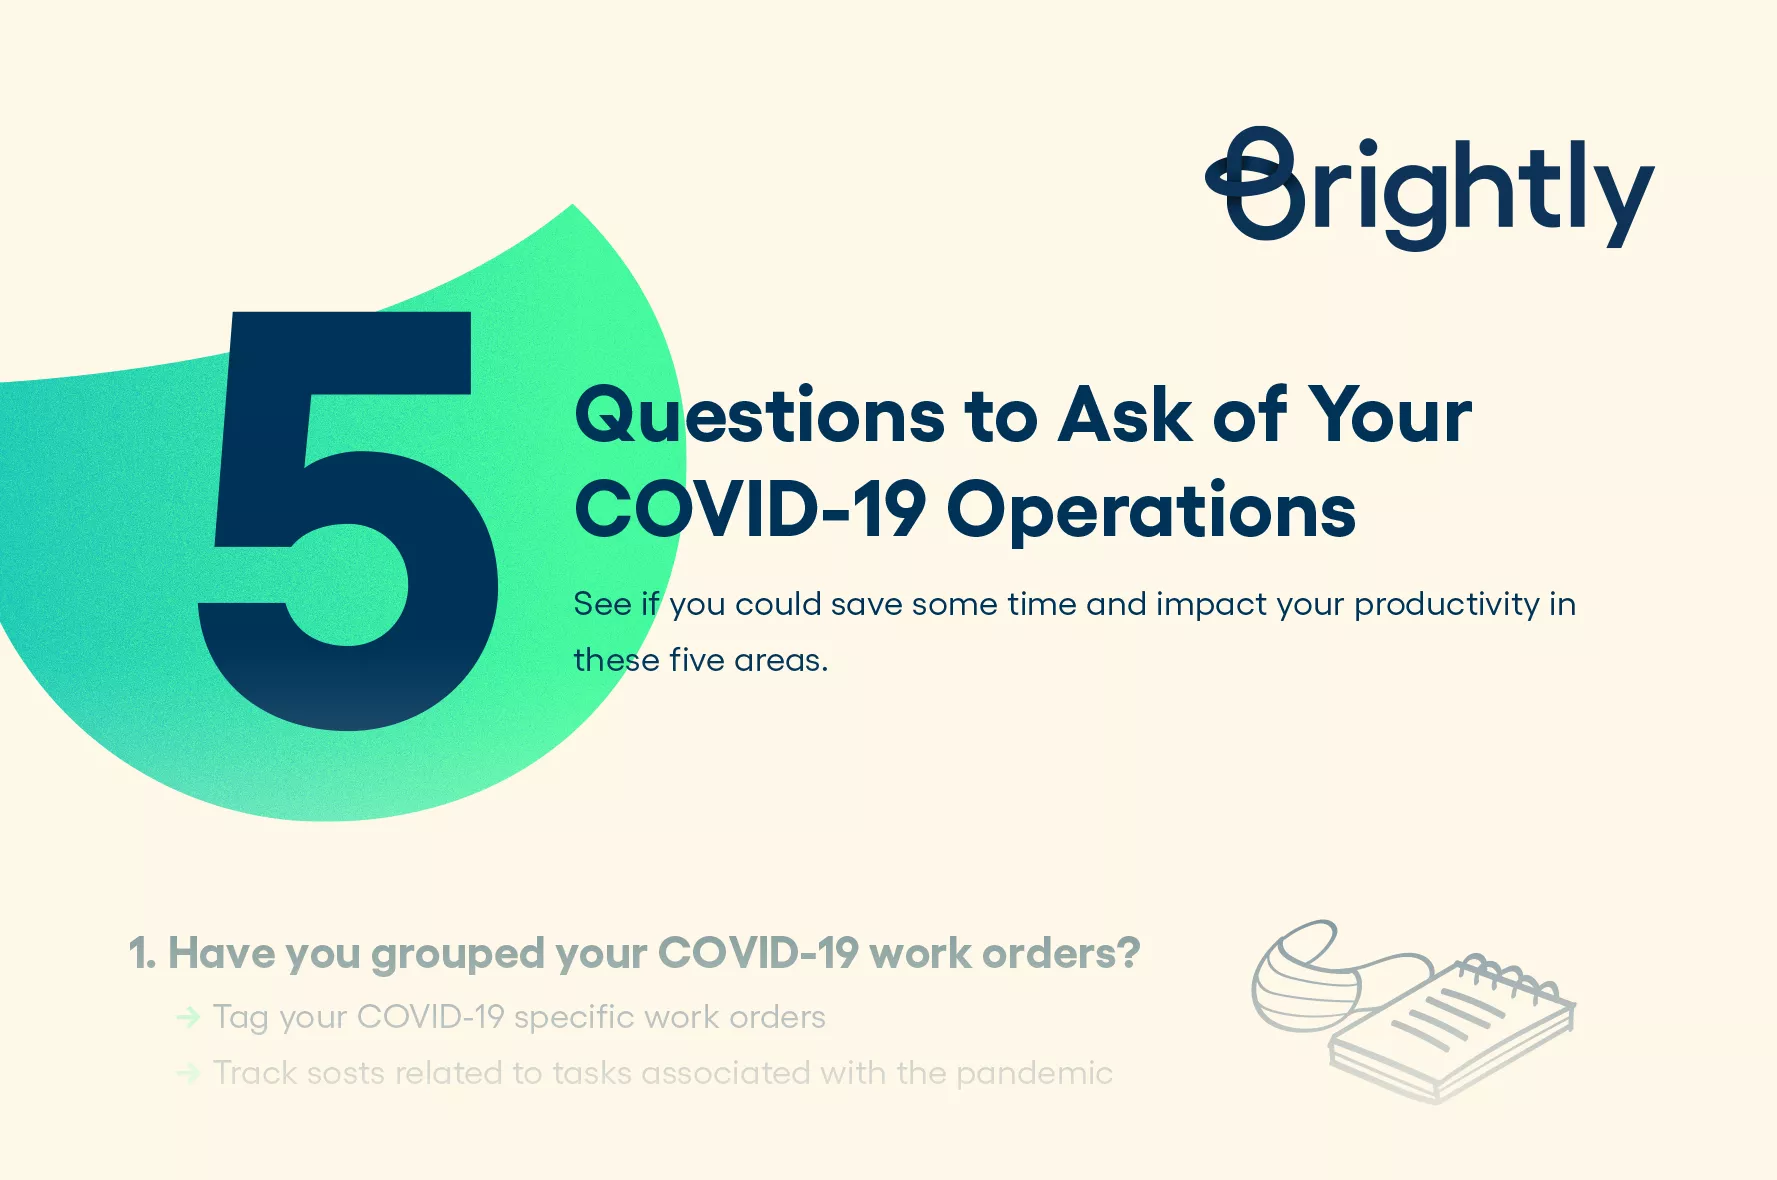 5 Questions to Ask of Your COVID-19 Operations